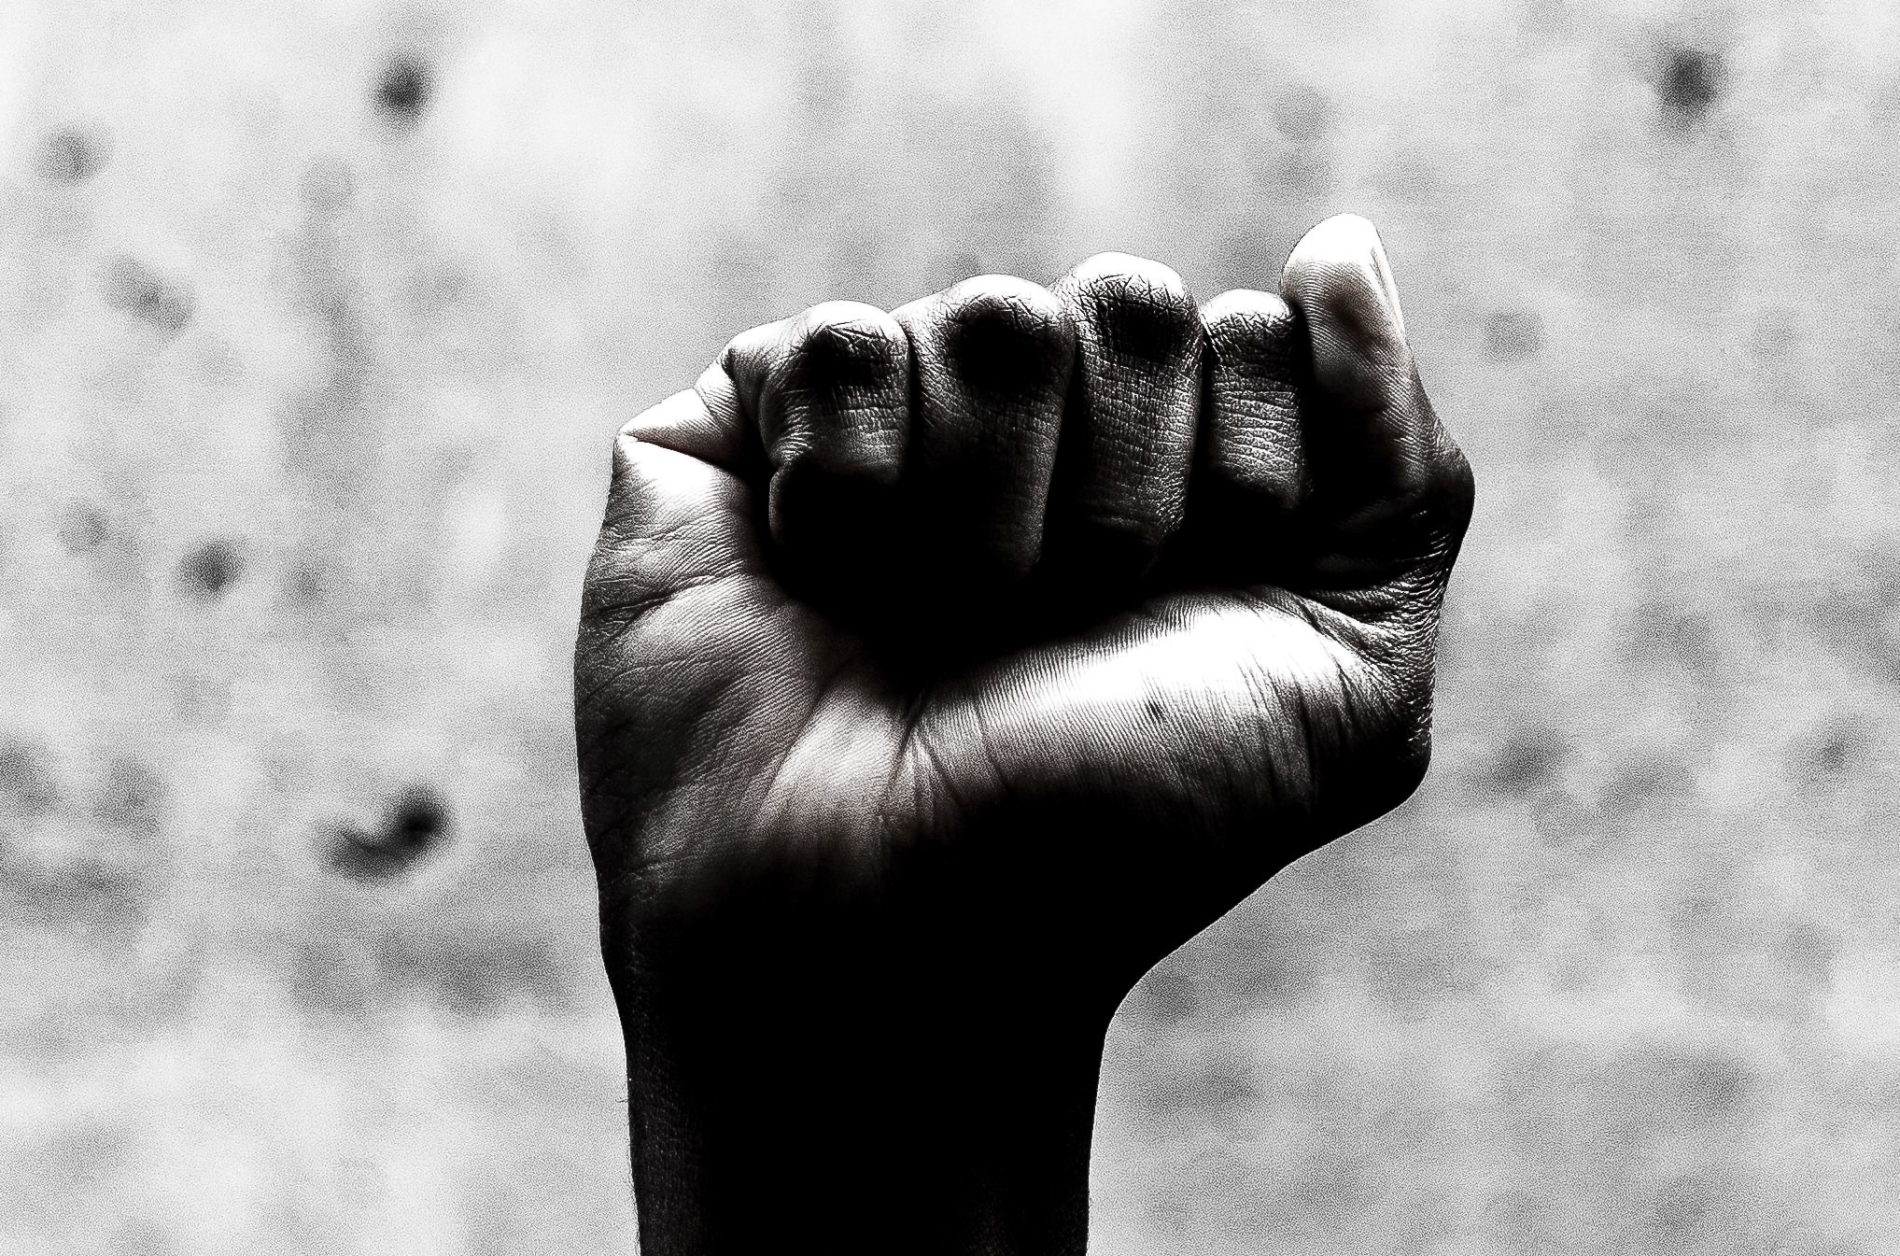 A black hand raised in a fist referring to the civil rights movement 